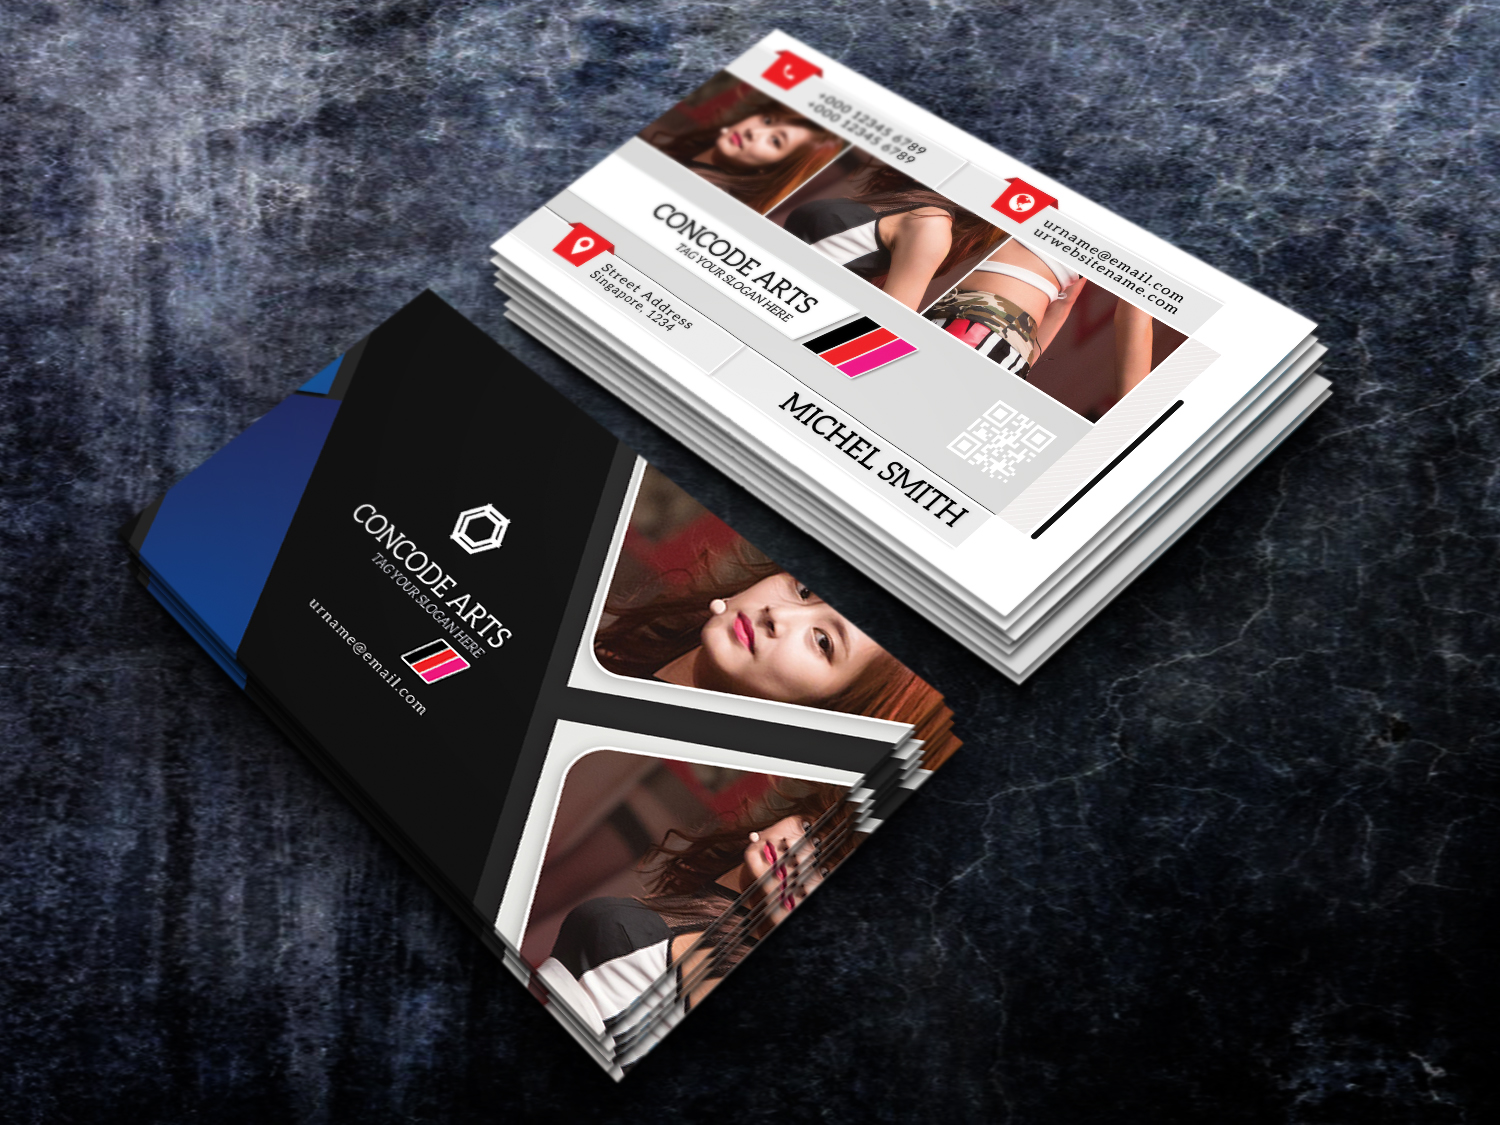 free download cool fashion design business cards vol 124 - Creative ...